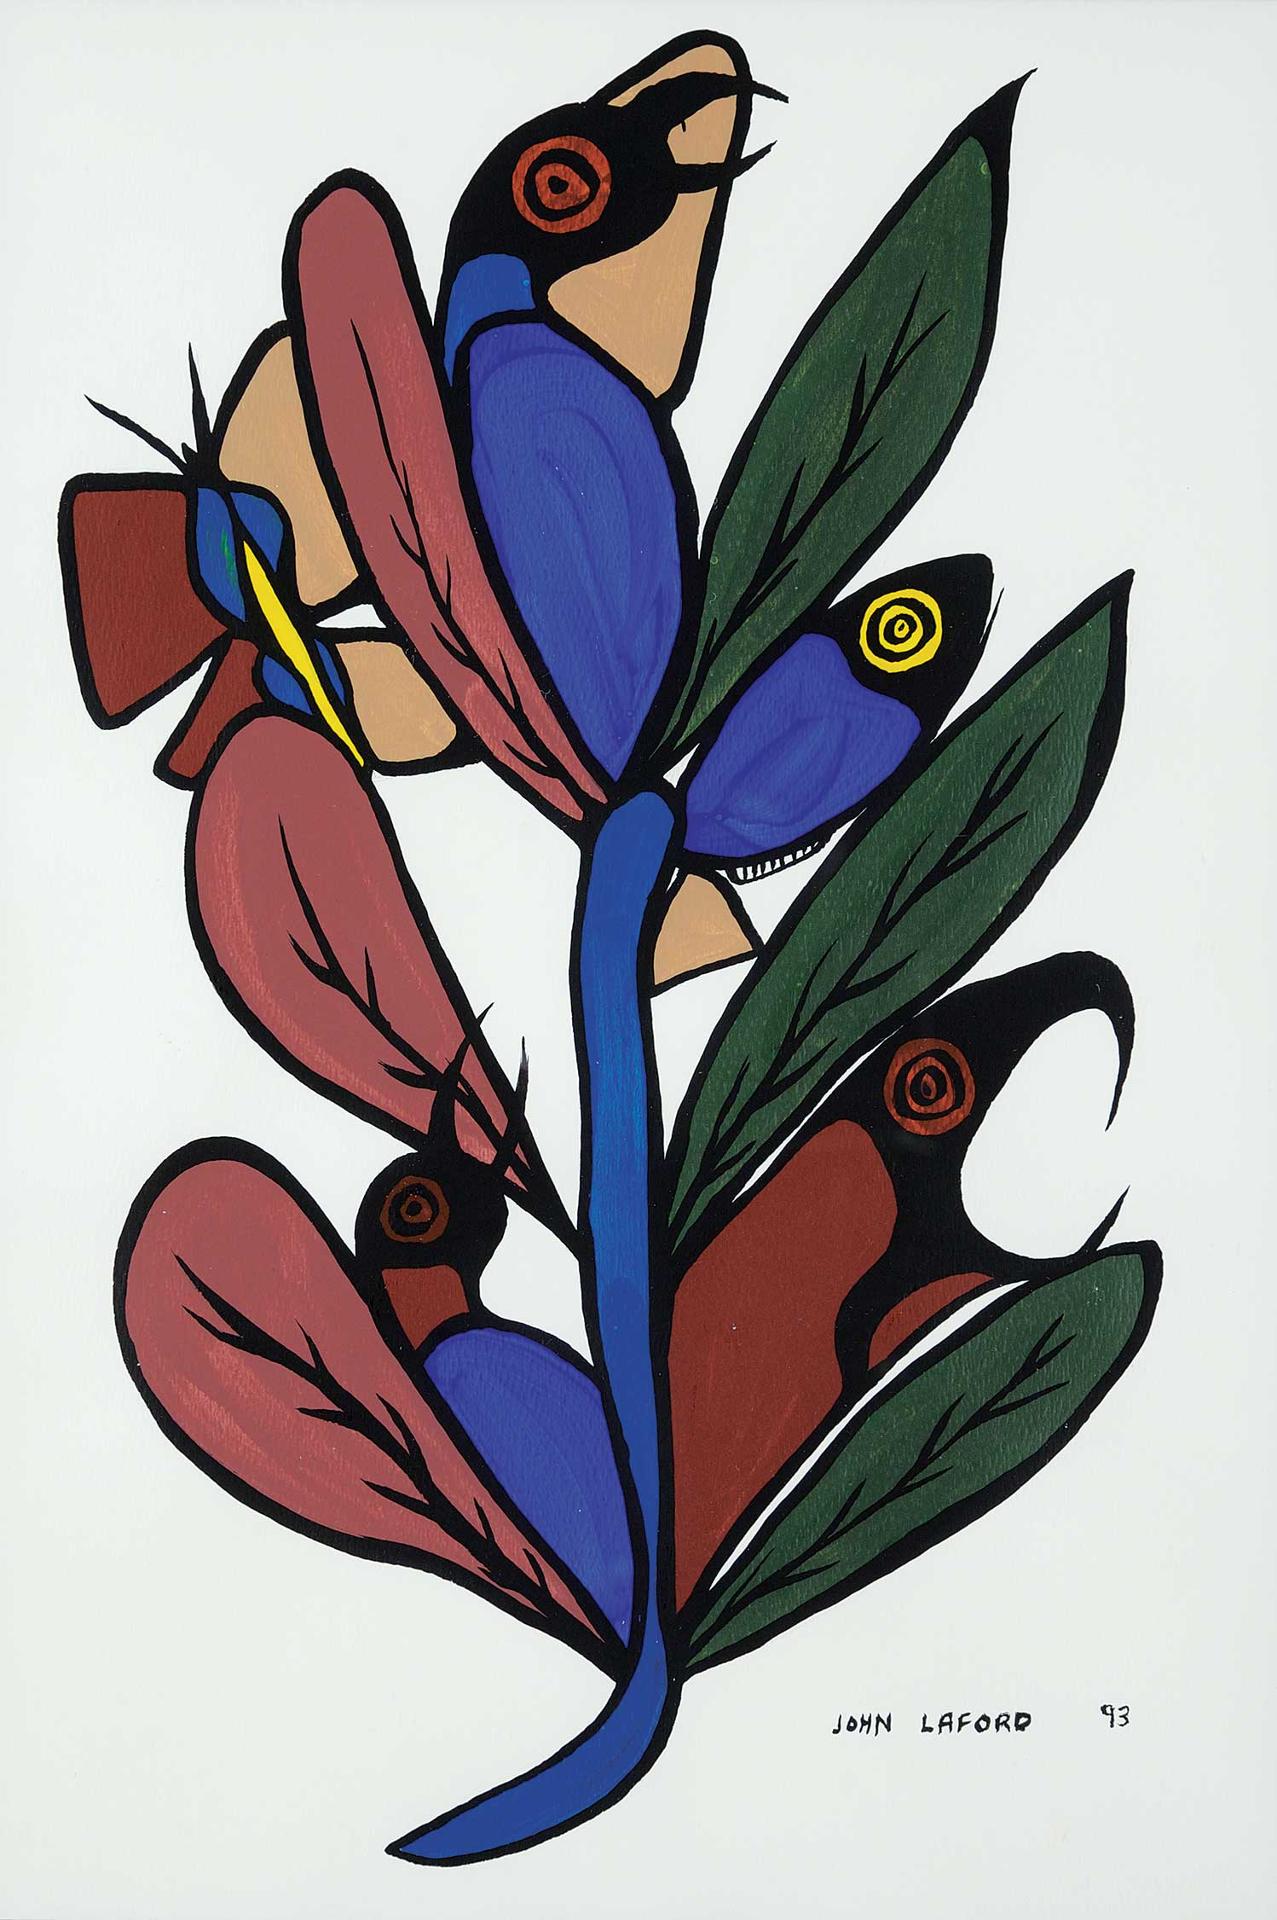 John Eric Laford (1954) - Untitled - Birds in the Leaves